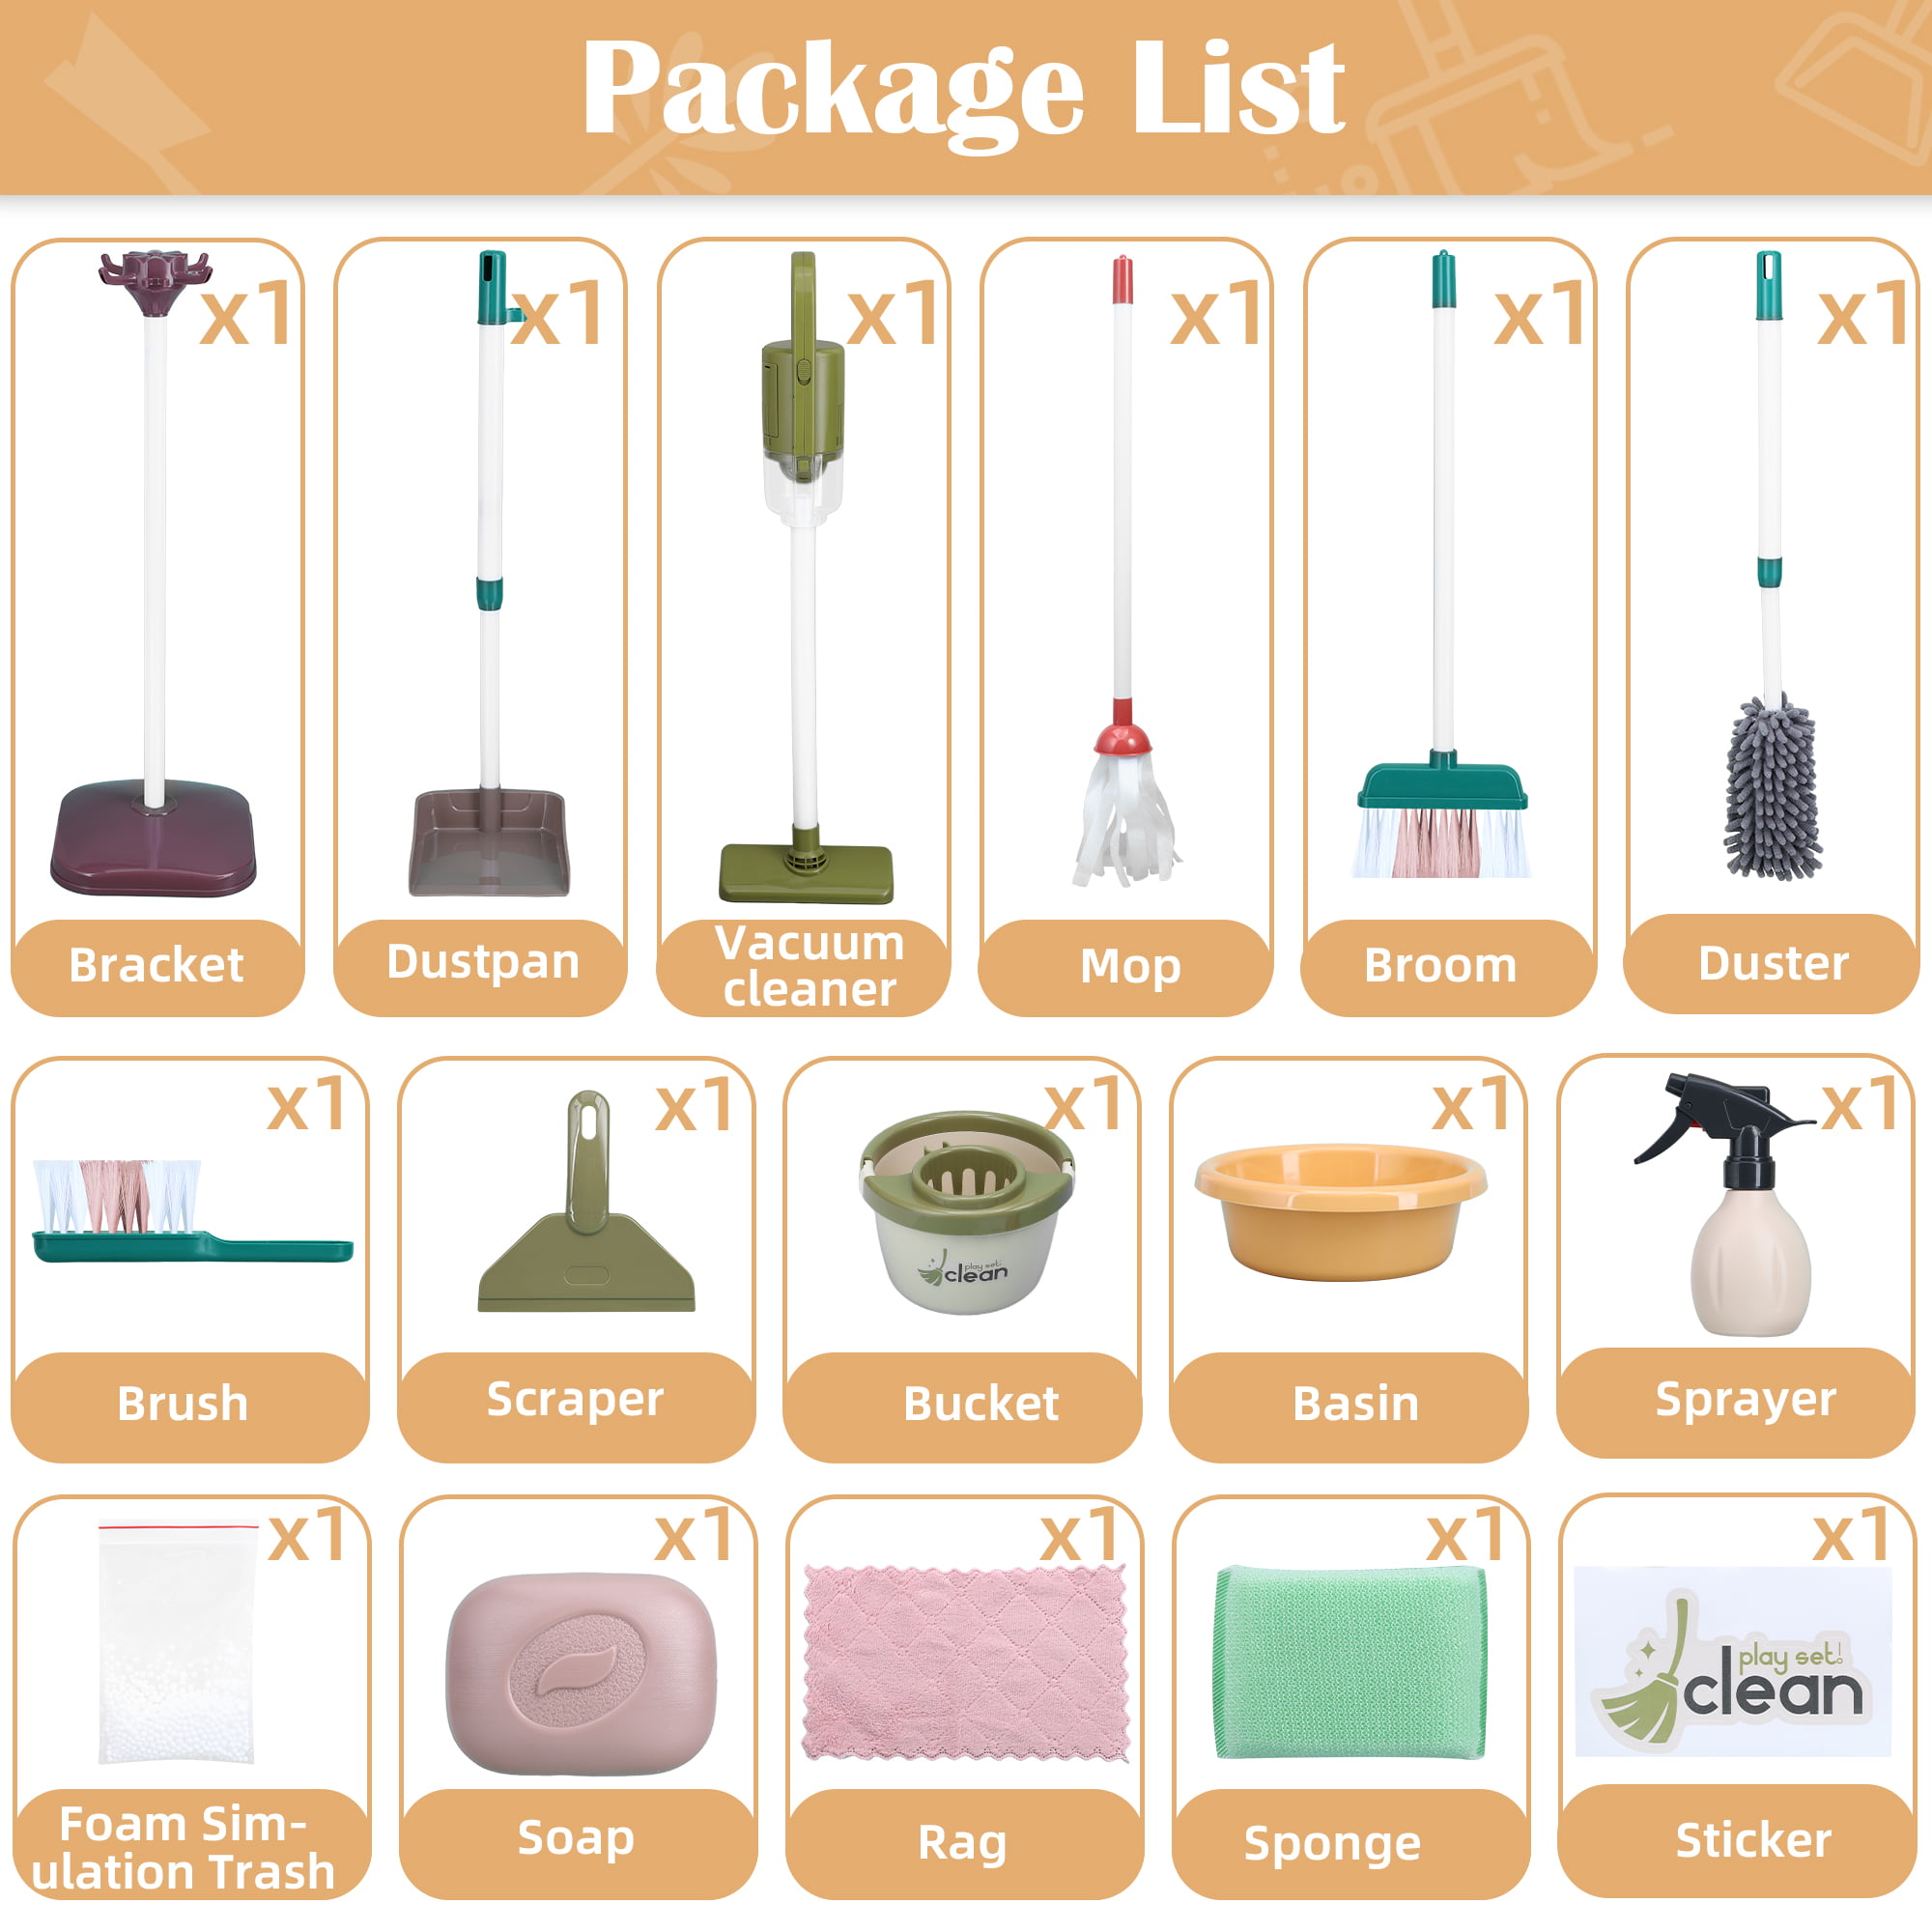 Home Cleaning Supplies List - How to Create the Ultimate Home Cleaning Kit  - Viva Veltoro